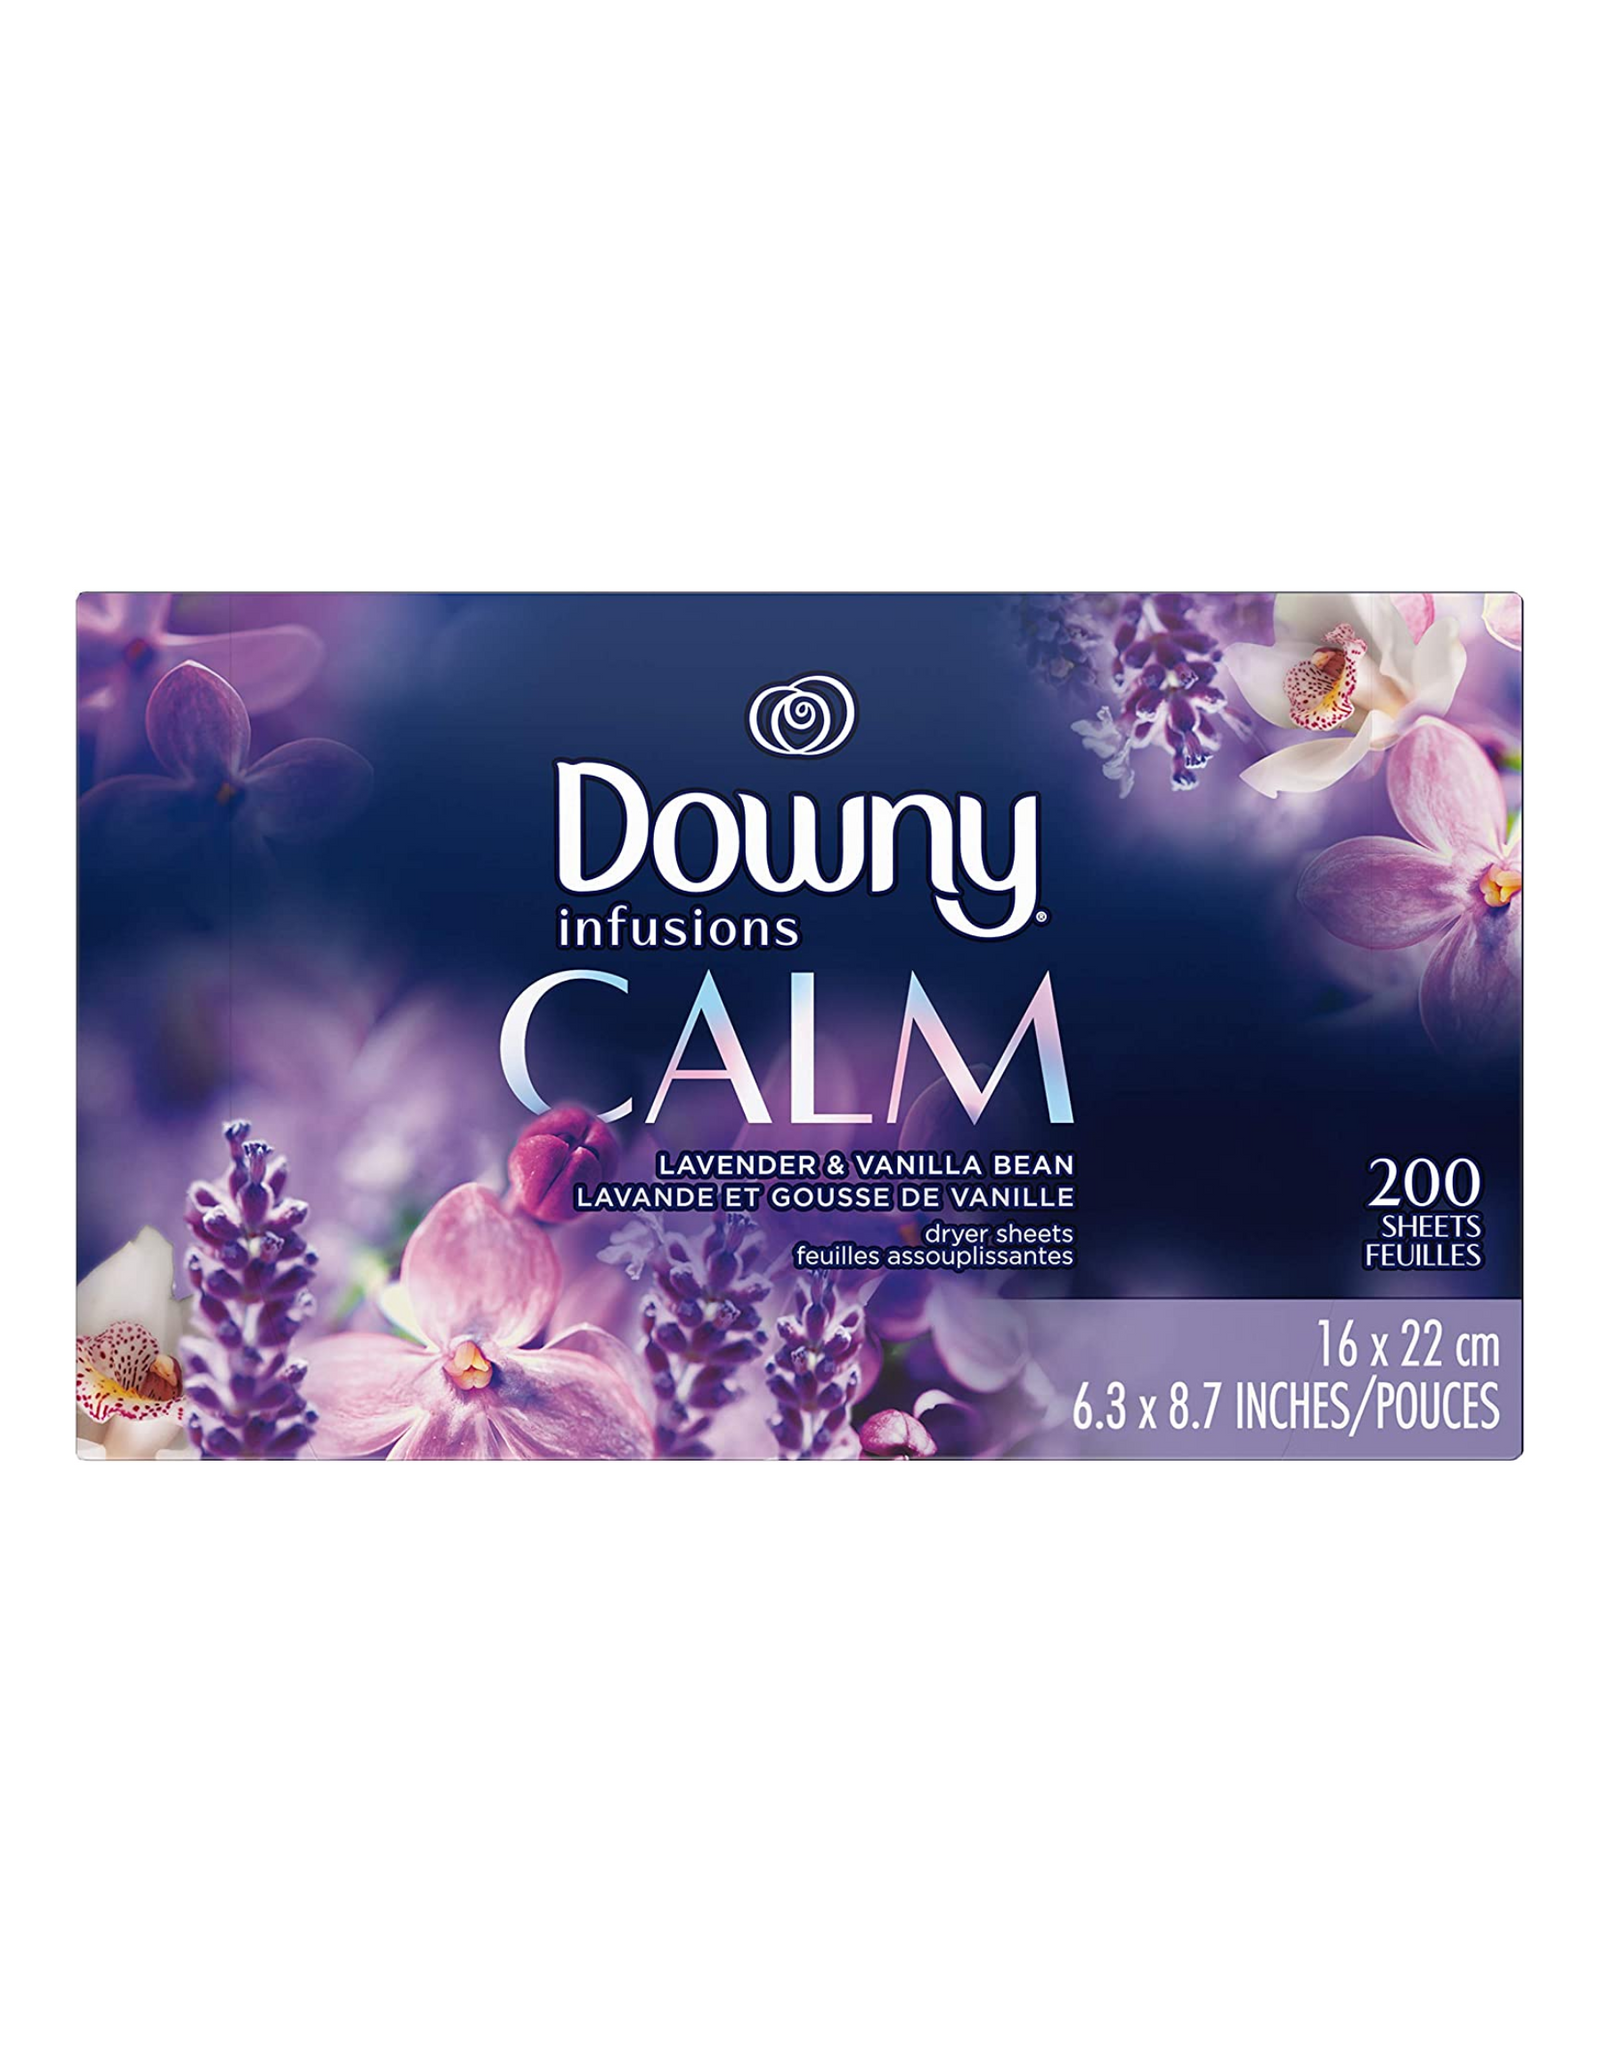 Downy Infusions Dryer Sheets Laundry Fabric Softener, Calm Scent, Lavender & Vanilla Bean, 200 Ct